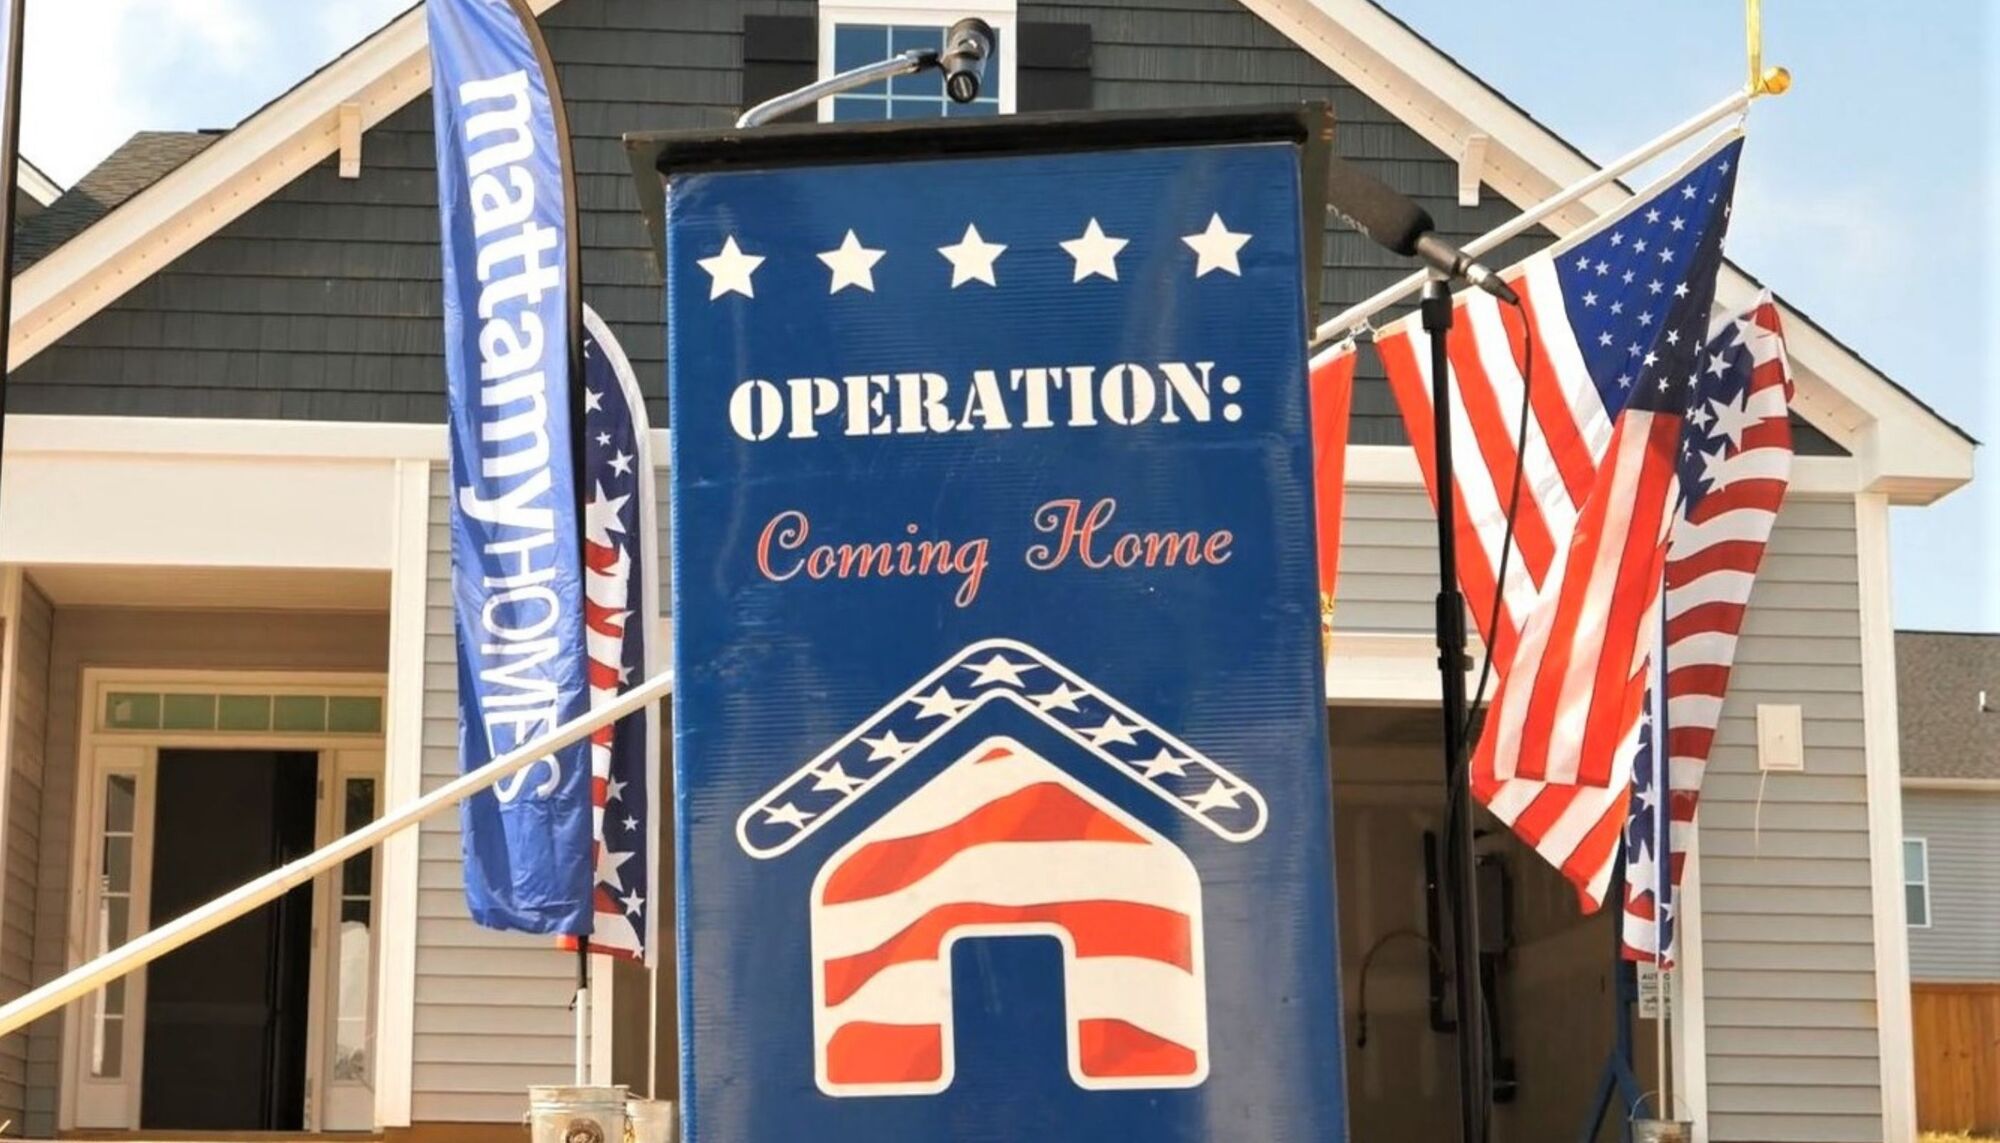 Operation: Coming Home banner displayed along with Mattamy Homes logo and American flag with new home behind them